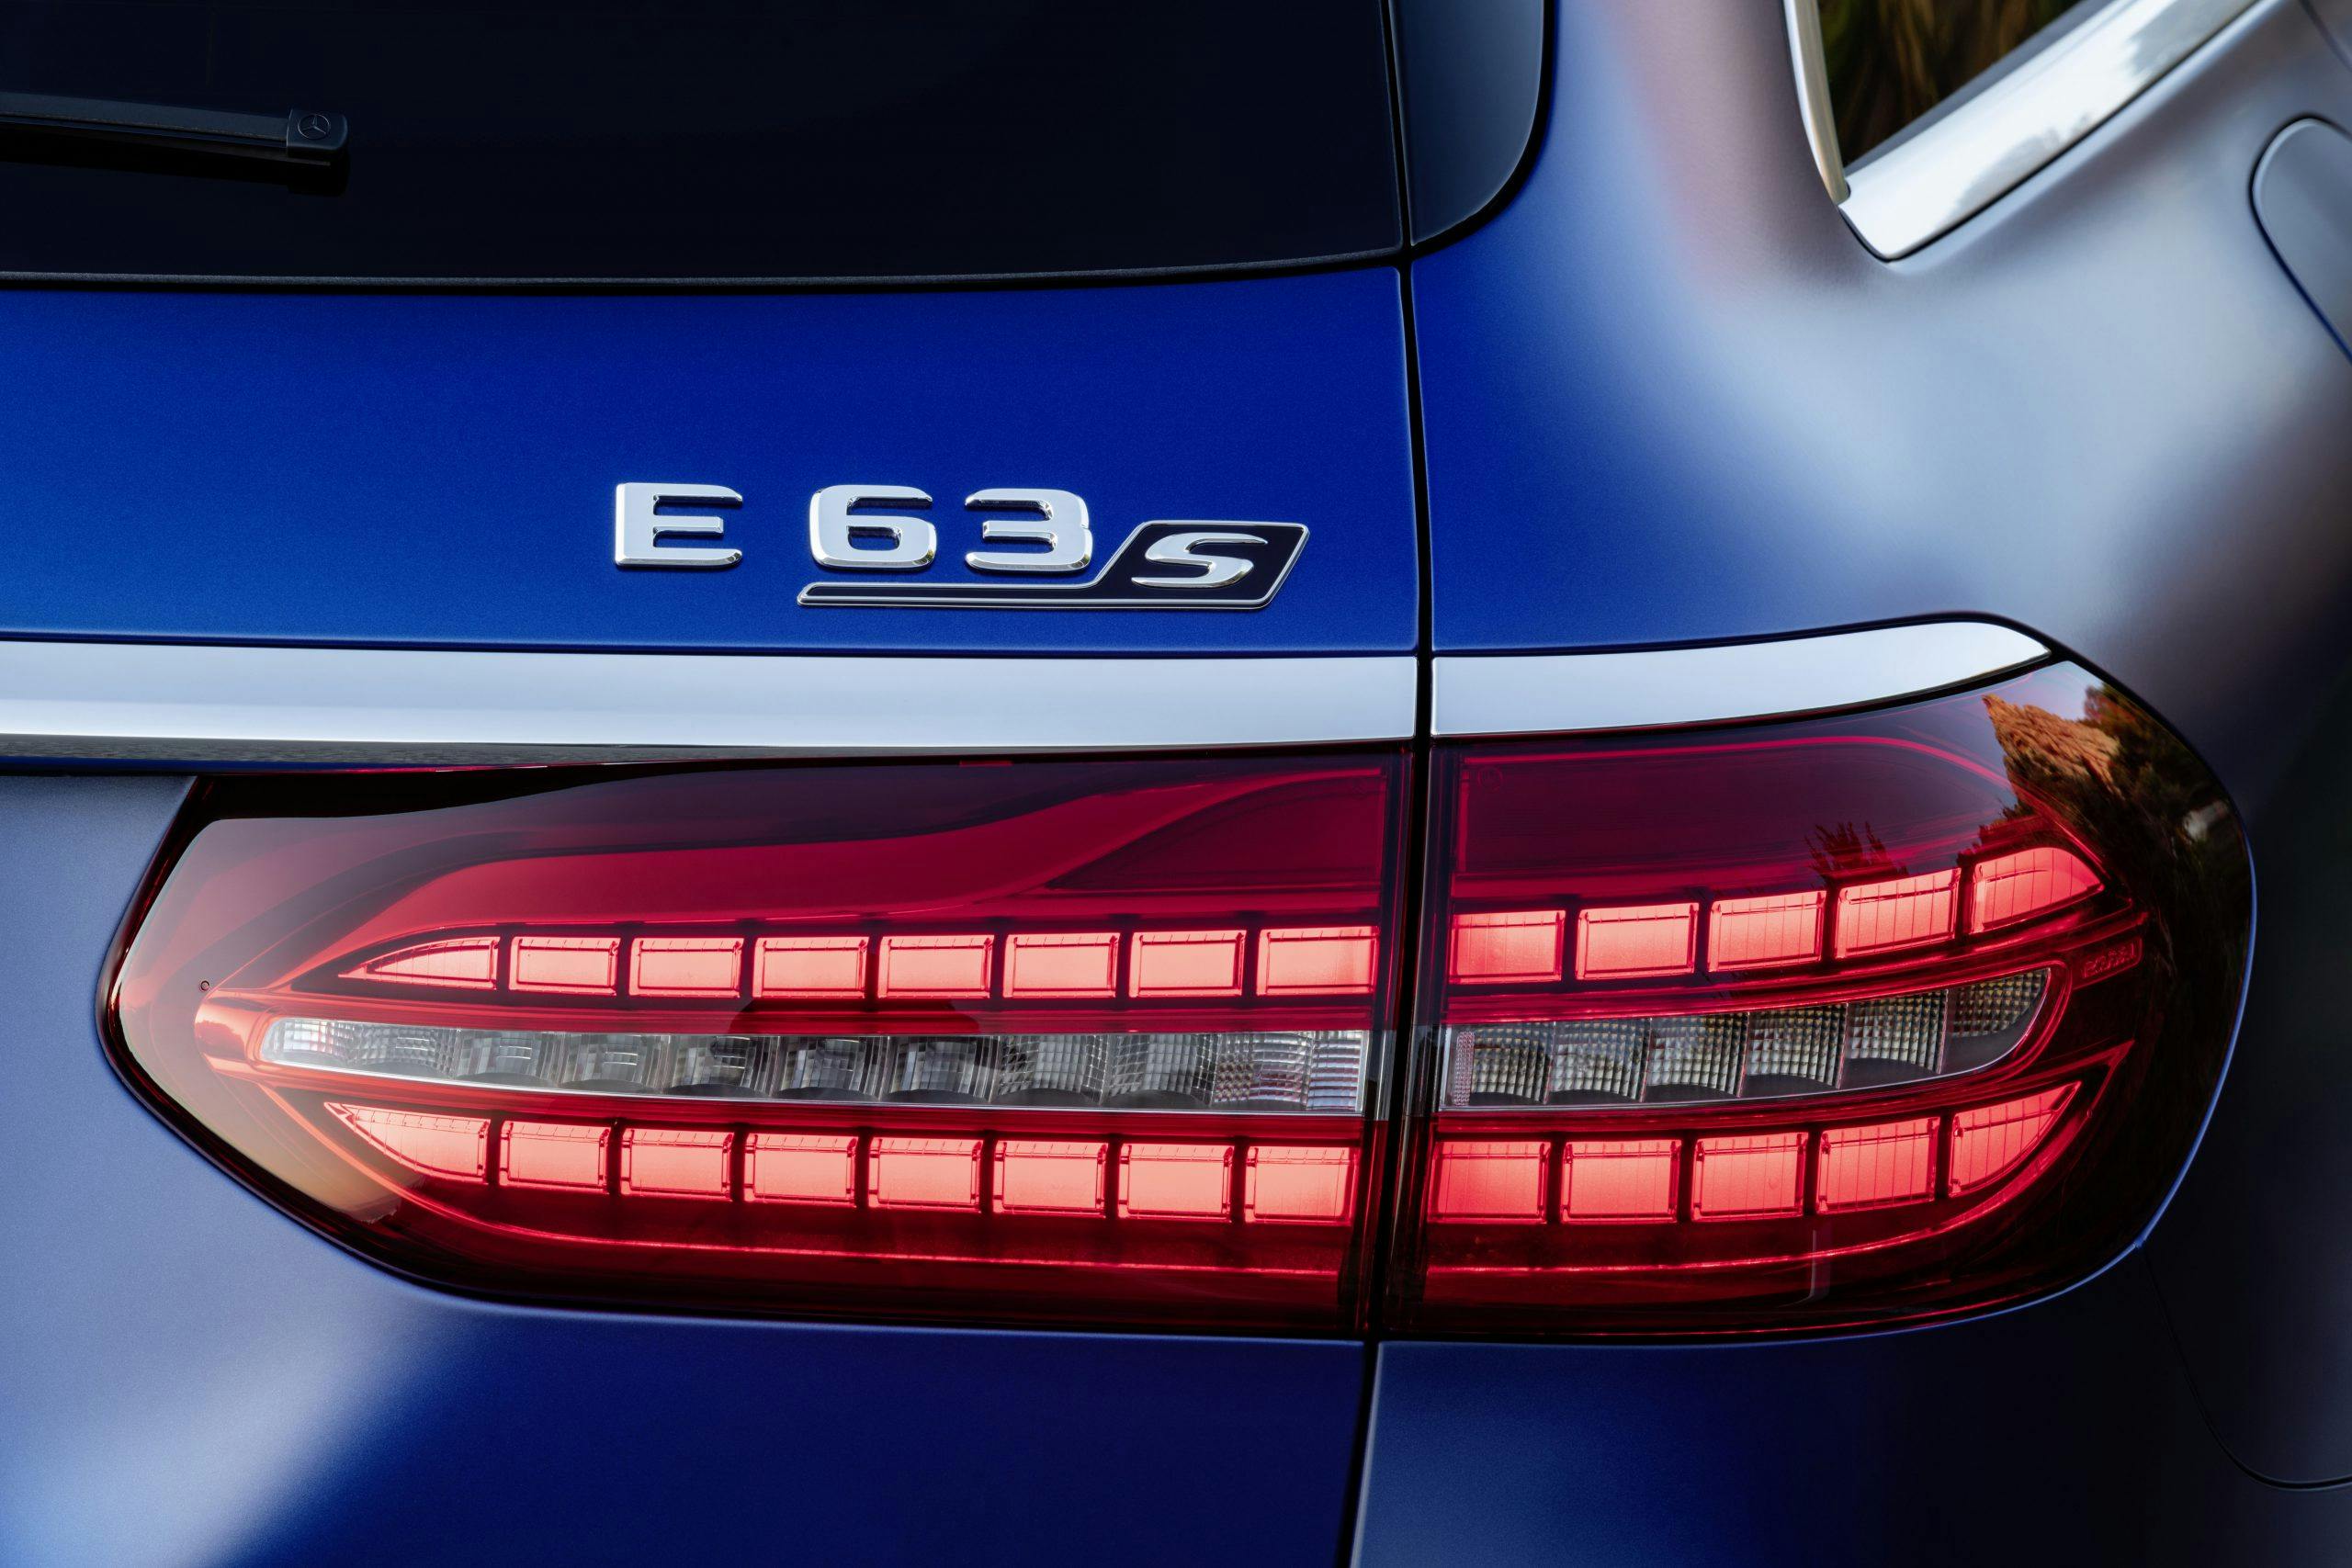 2021 Mercedes-AMG E63 S badge and light